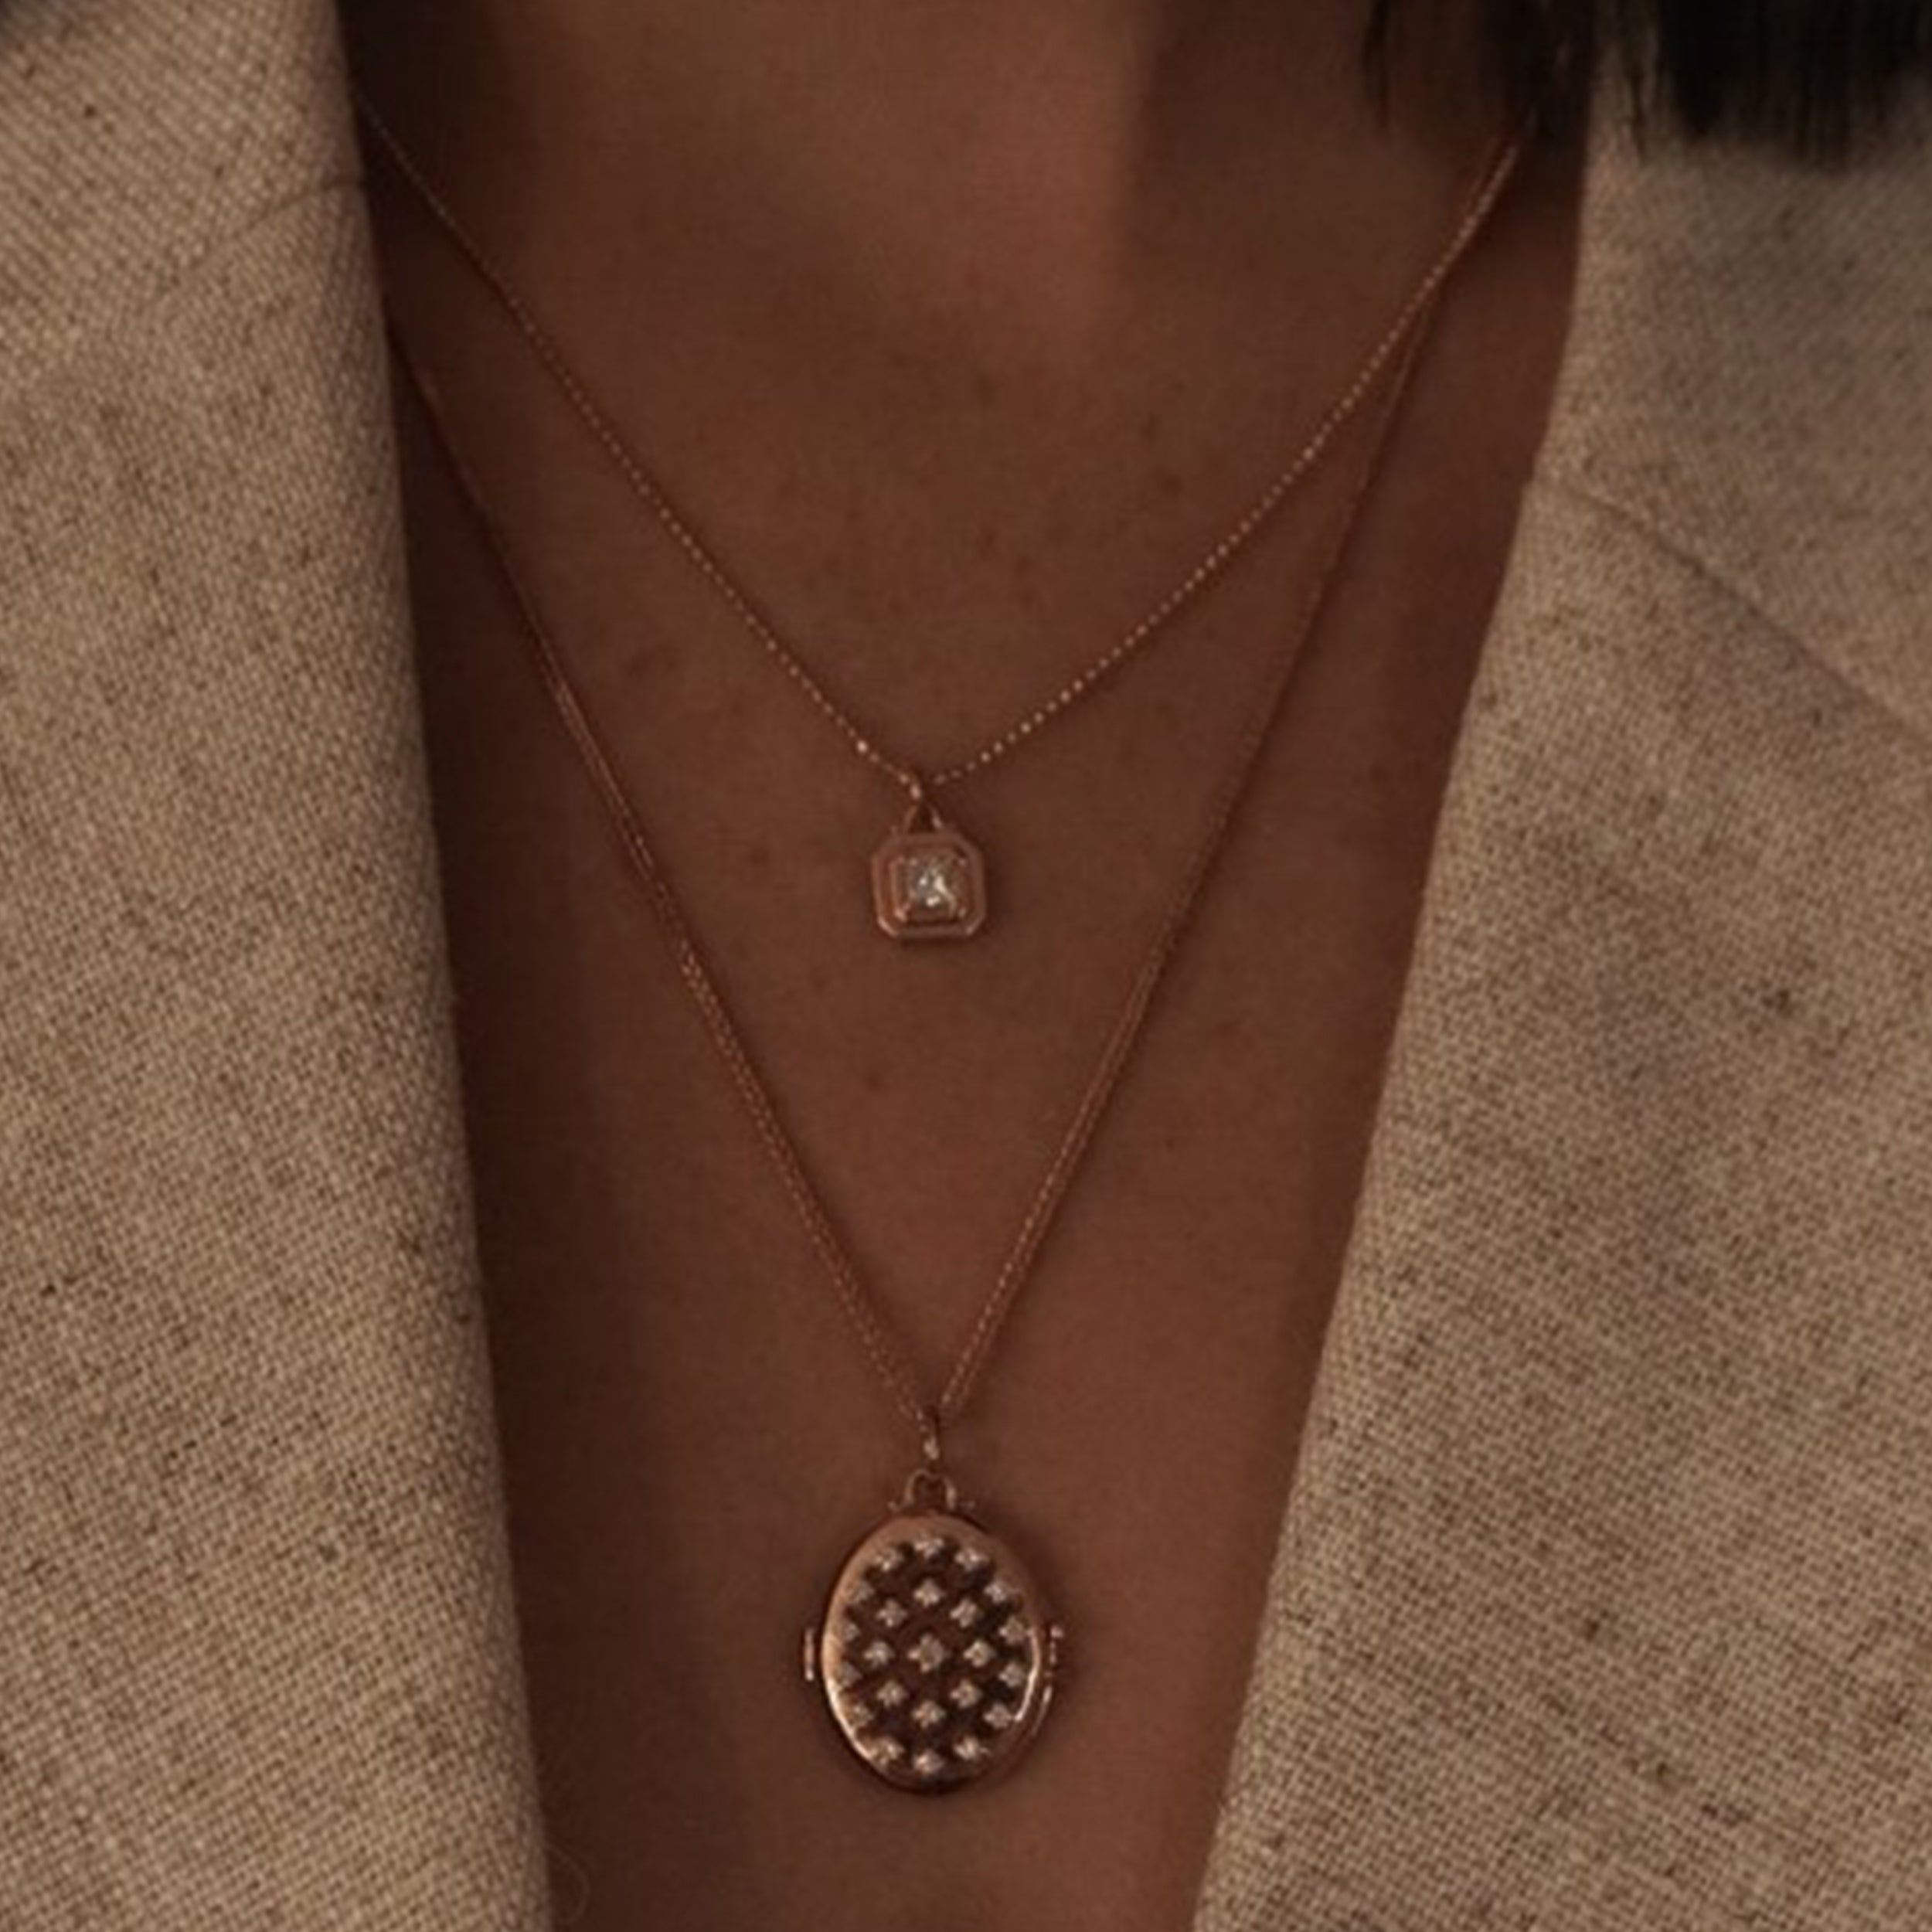 Comet Necklace shown with the Etoile Locket